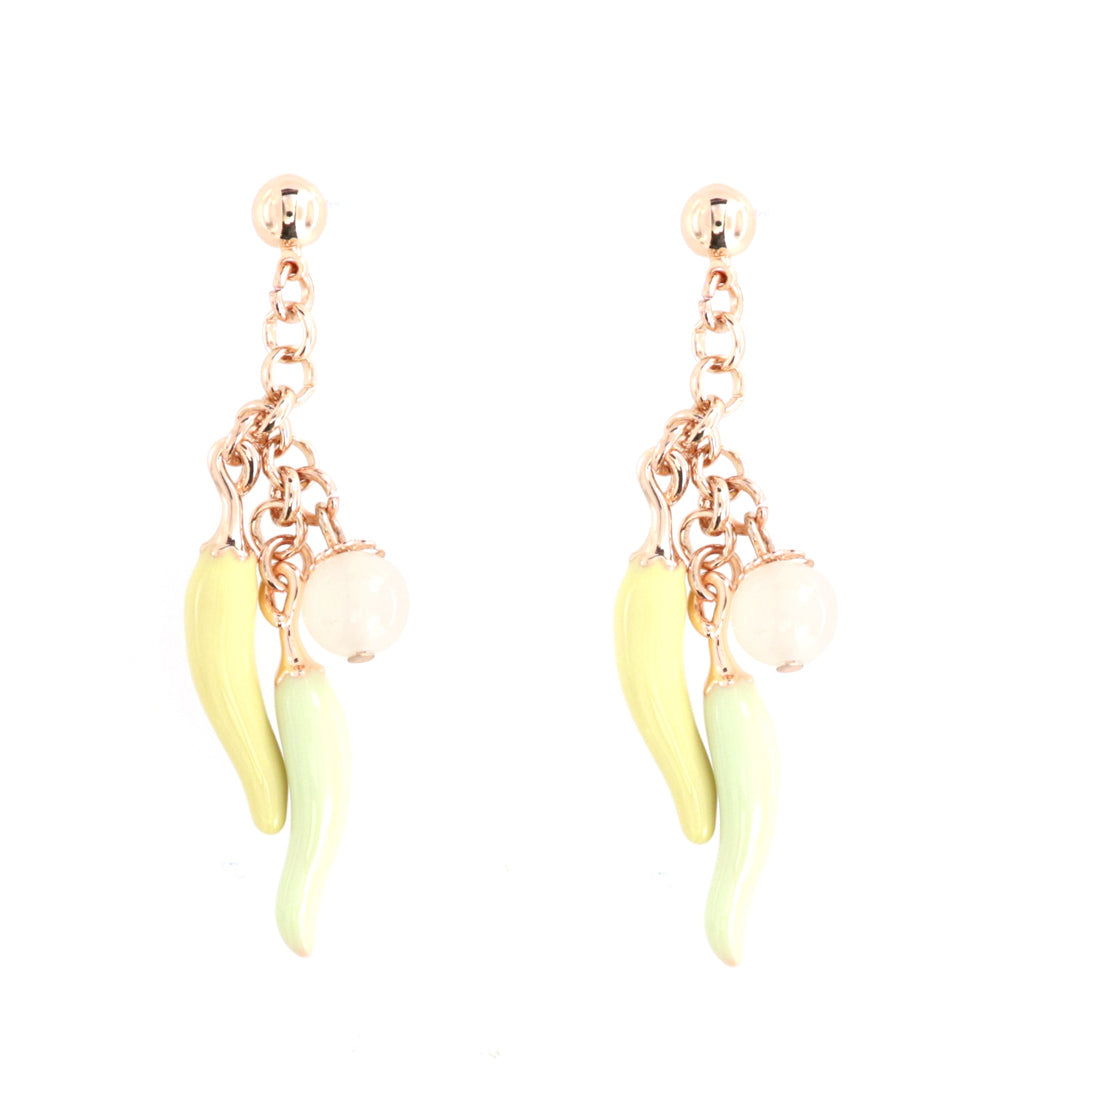 Metal earrings pending with lucky horns, embellished with colored glazes